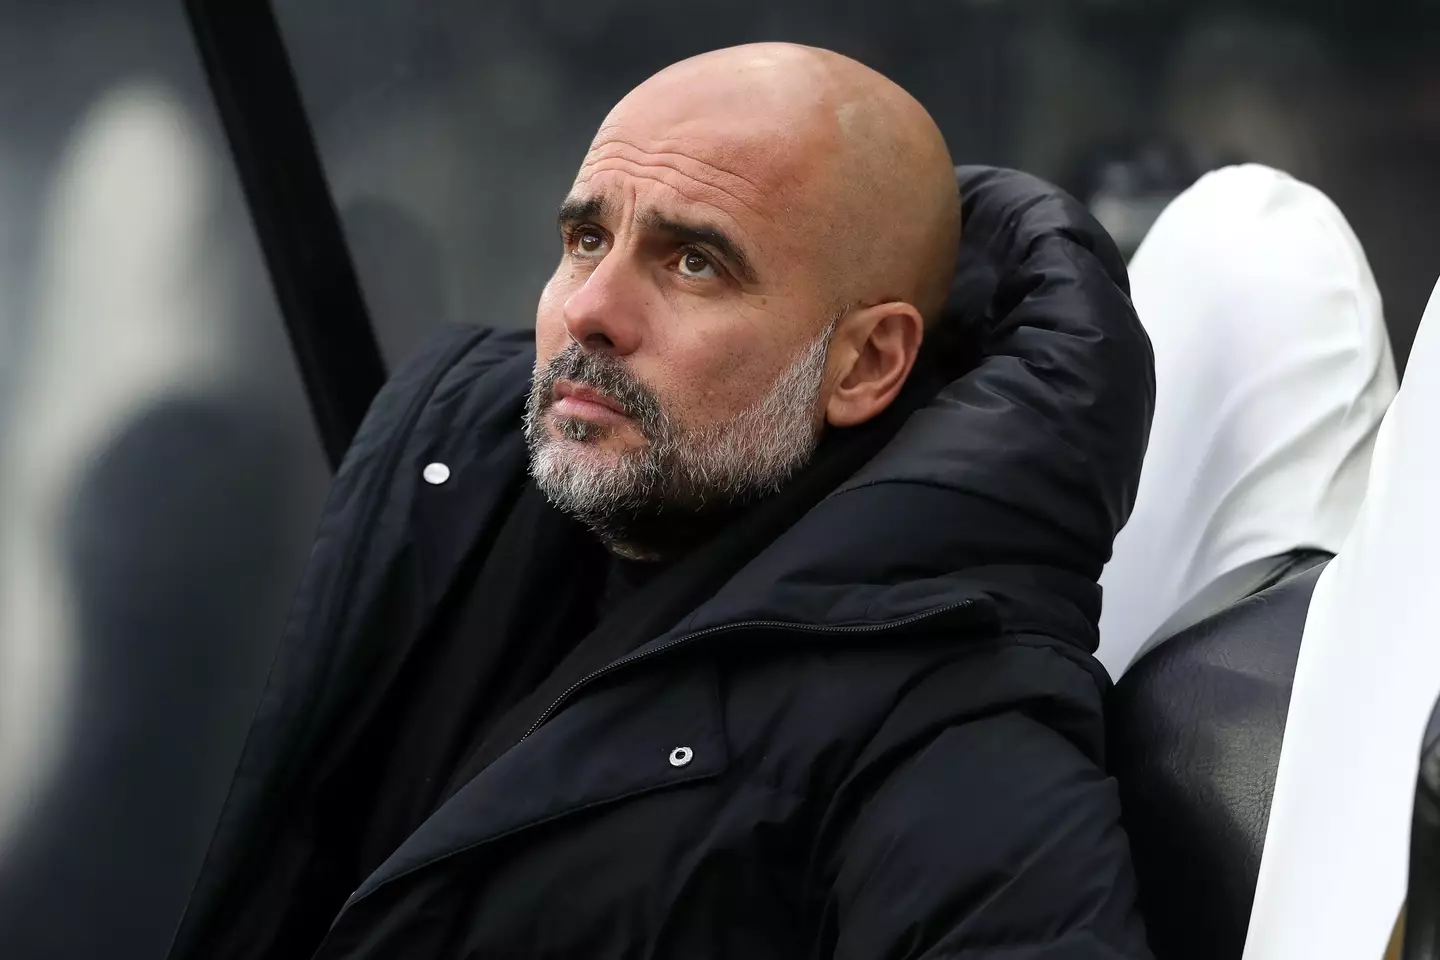 Guardiola is under contract at City until the summer of 2023 (Image: Alamy)